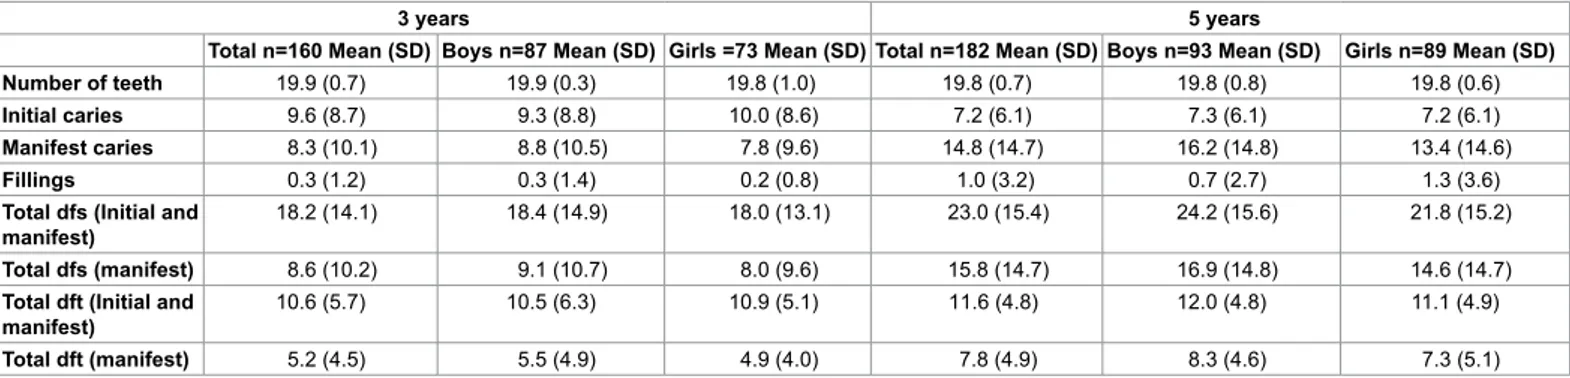 Table 1: Total number of teeth with initial and manifest carious lesions and fillings in 3 and 5 year olds, divided by gender